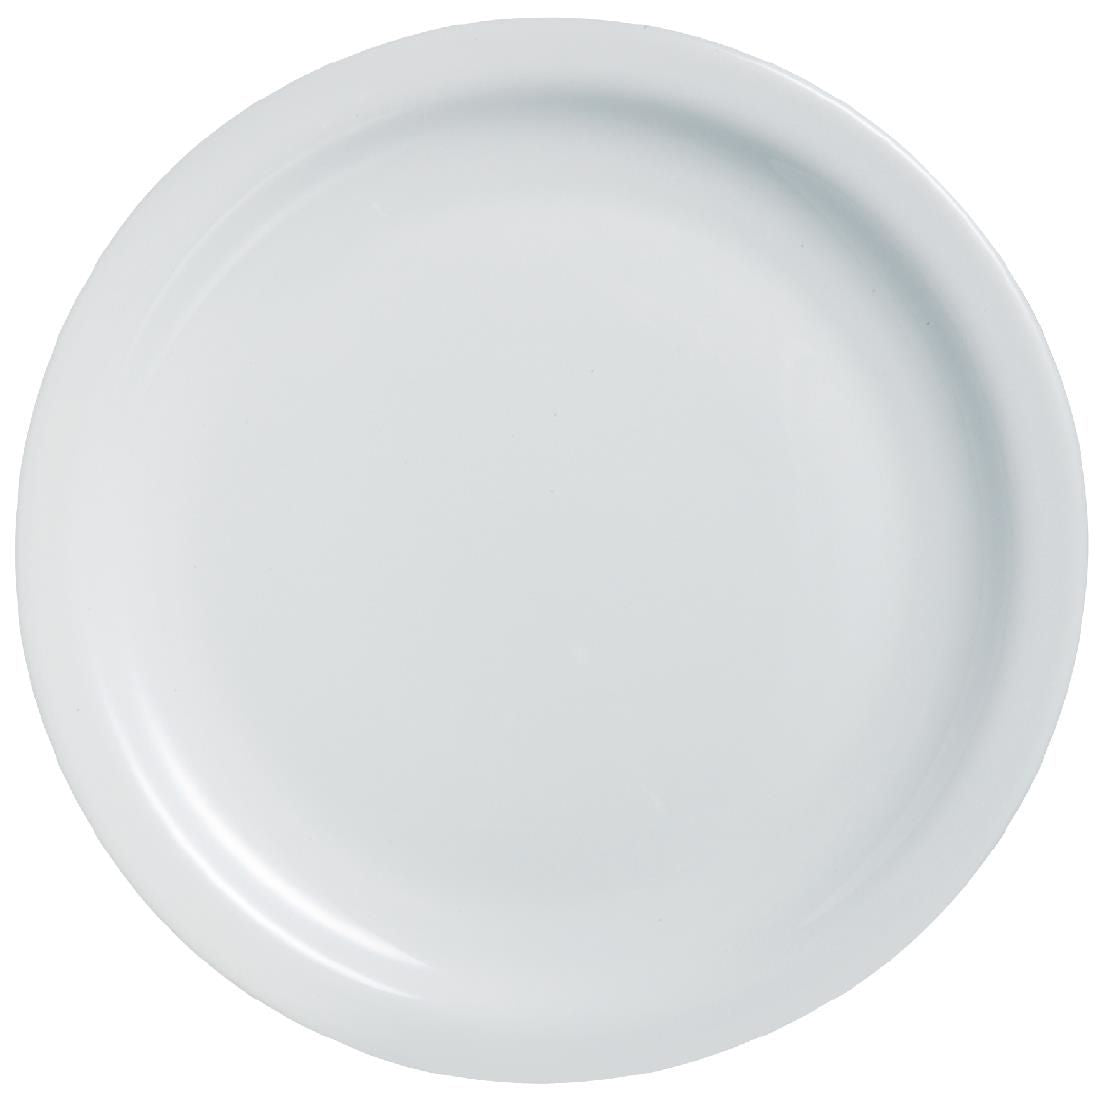 DP062 Arcoroc Opal Hoteliere Narrow Rim Plates 193mm (Pack of 6) JD Catering Equipment Solutions Ltd